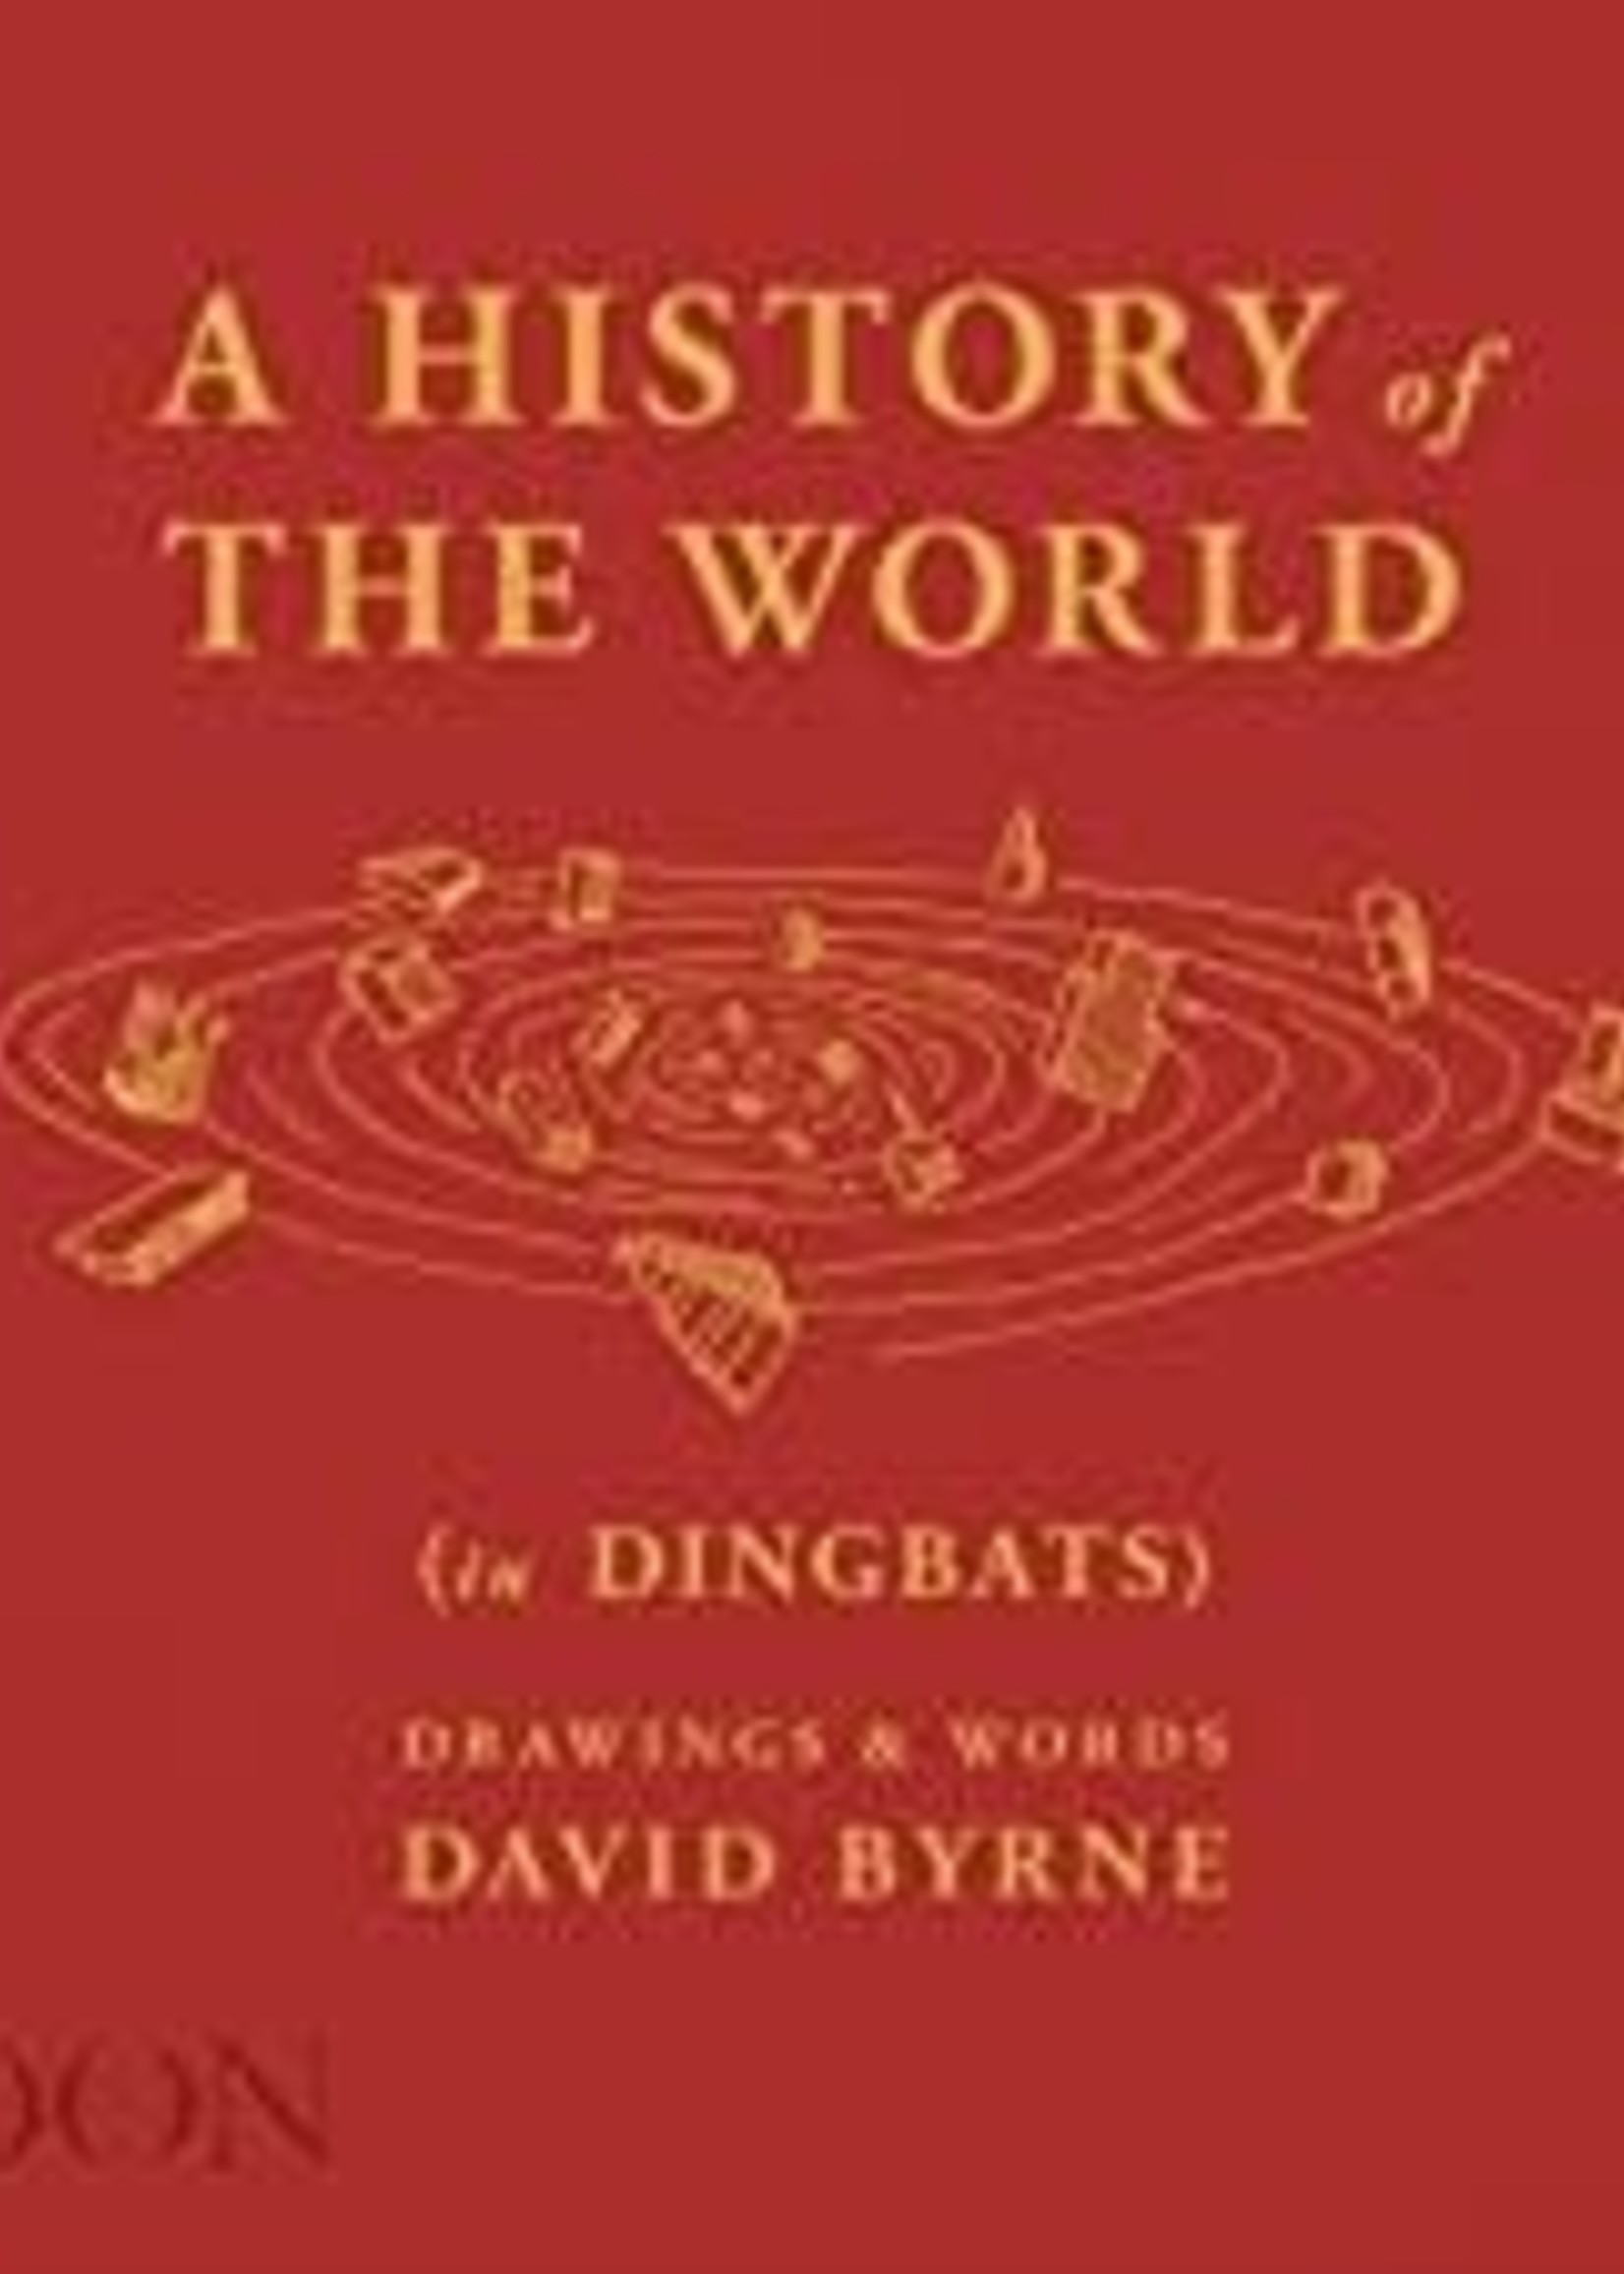 A History of the World (in Dingbats): Drawings Words by David Byrne, Alex Kalman